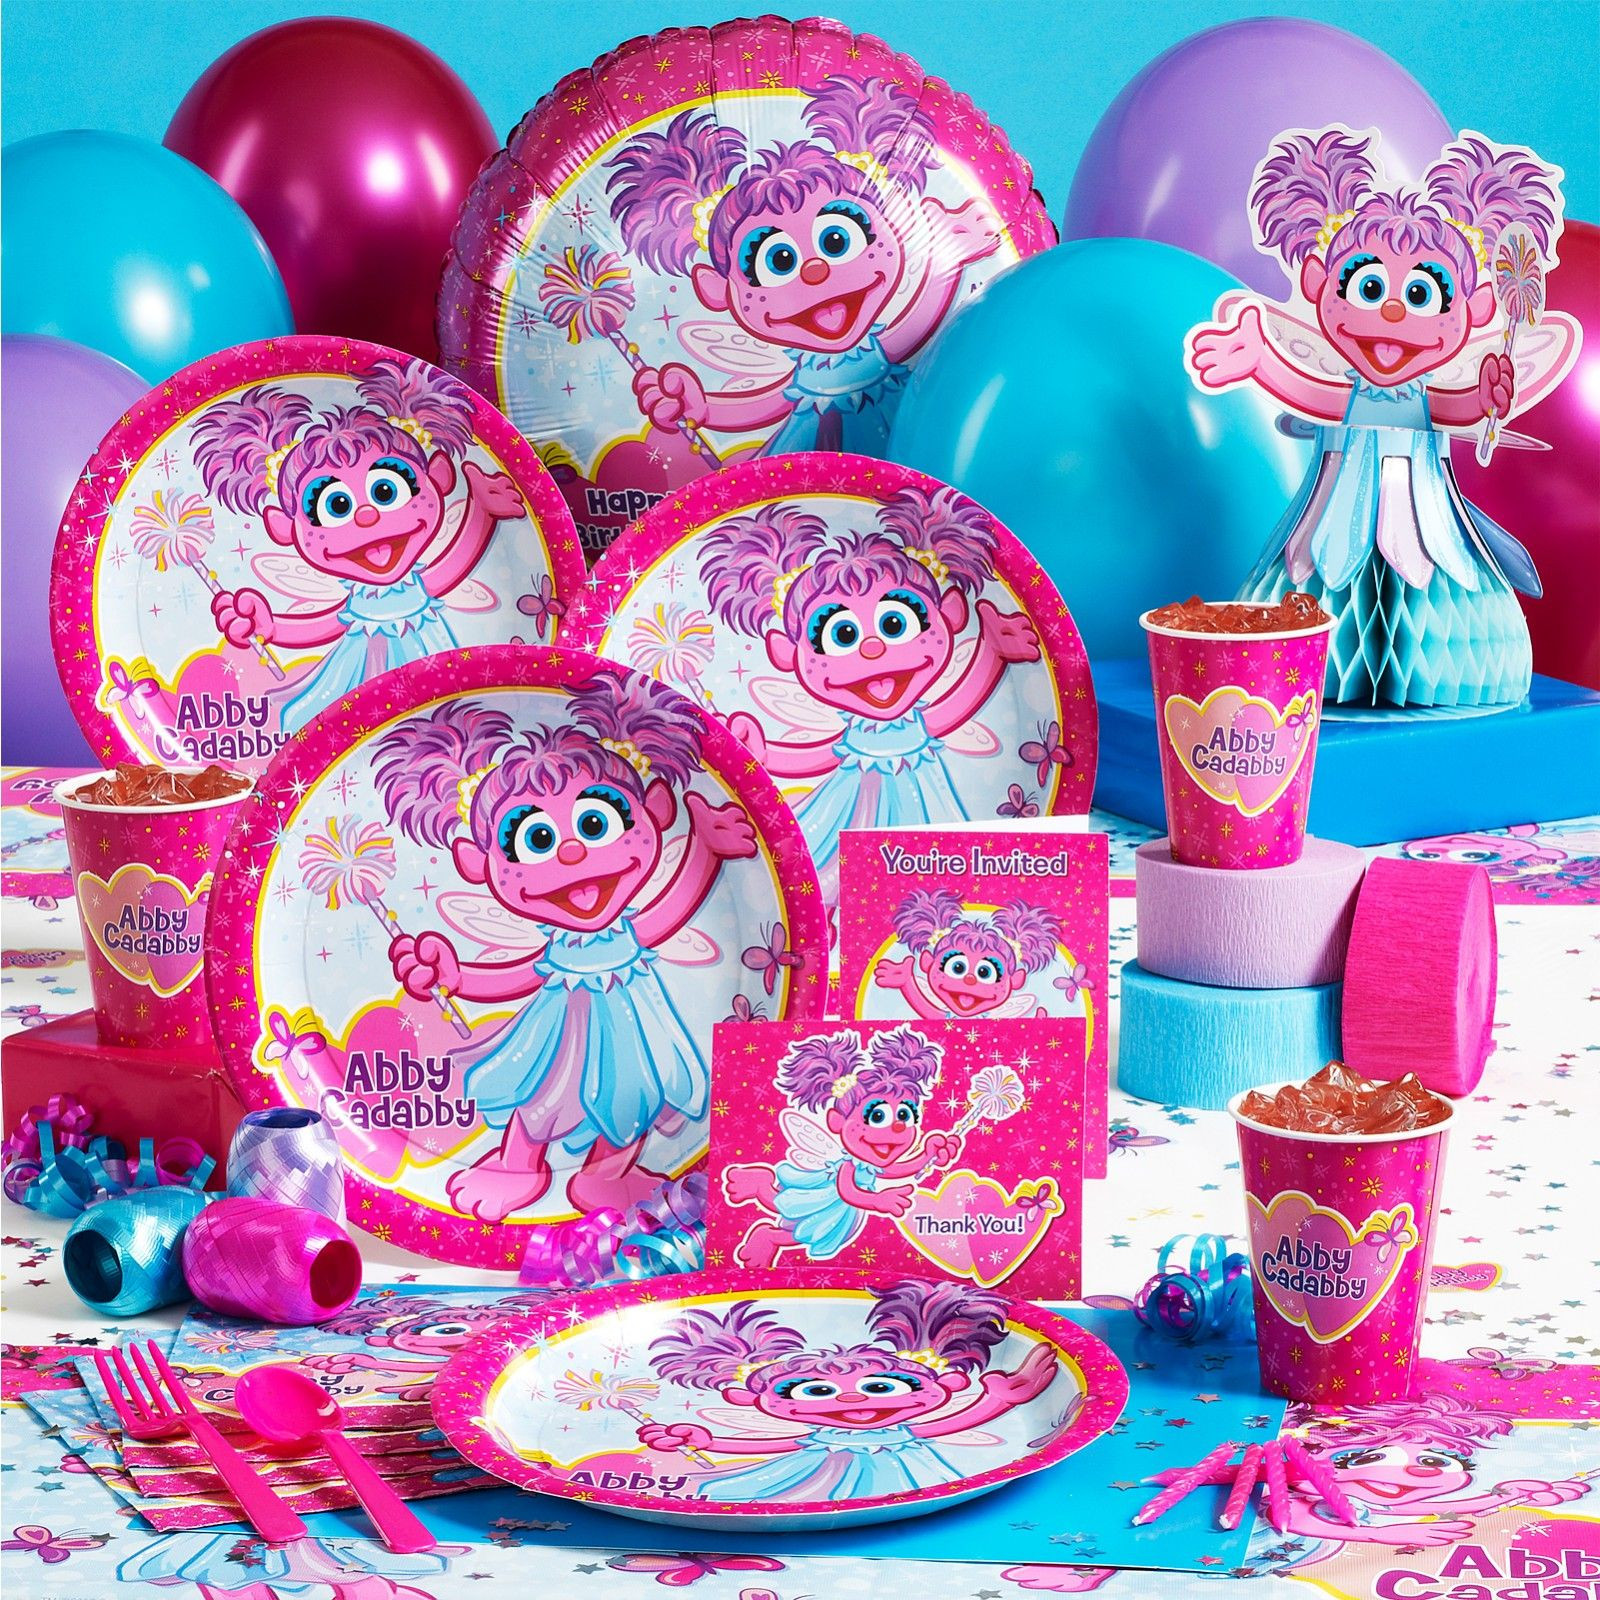 Abby Cadabby Birthday Decorations
 Abby Cadabby Party Supplies Pairs well with Elmo and